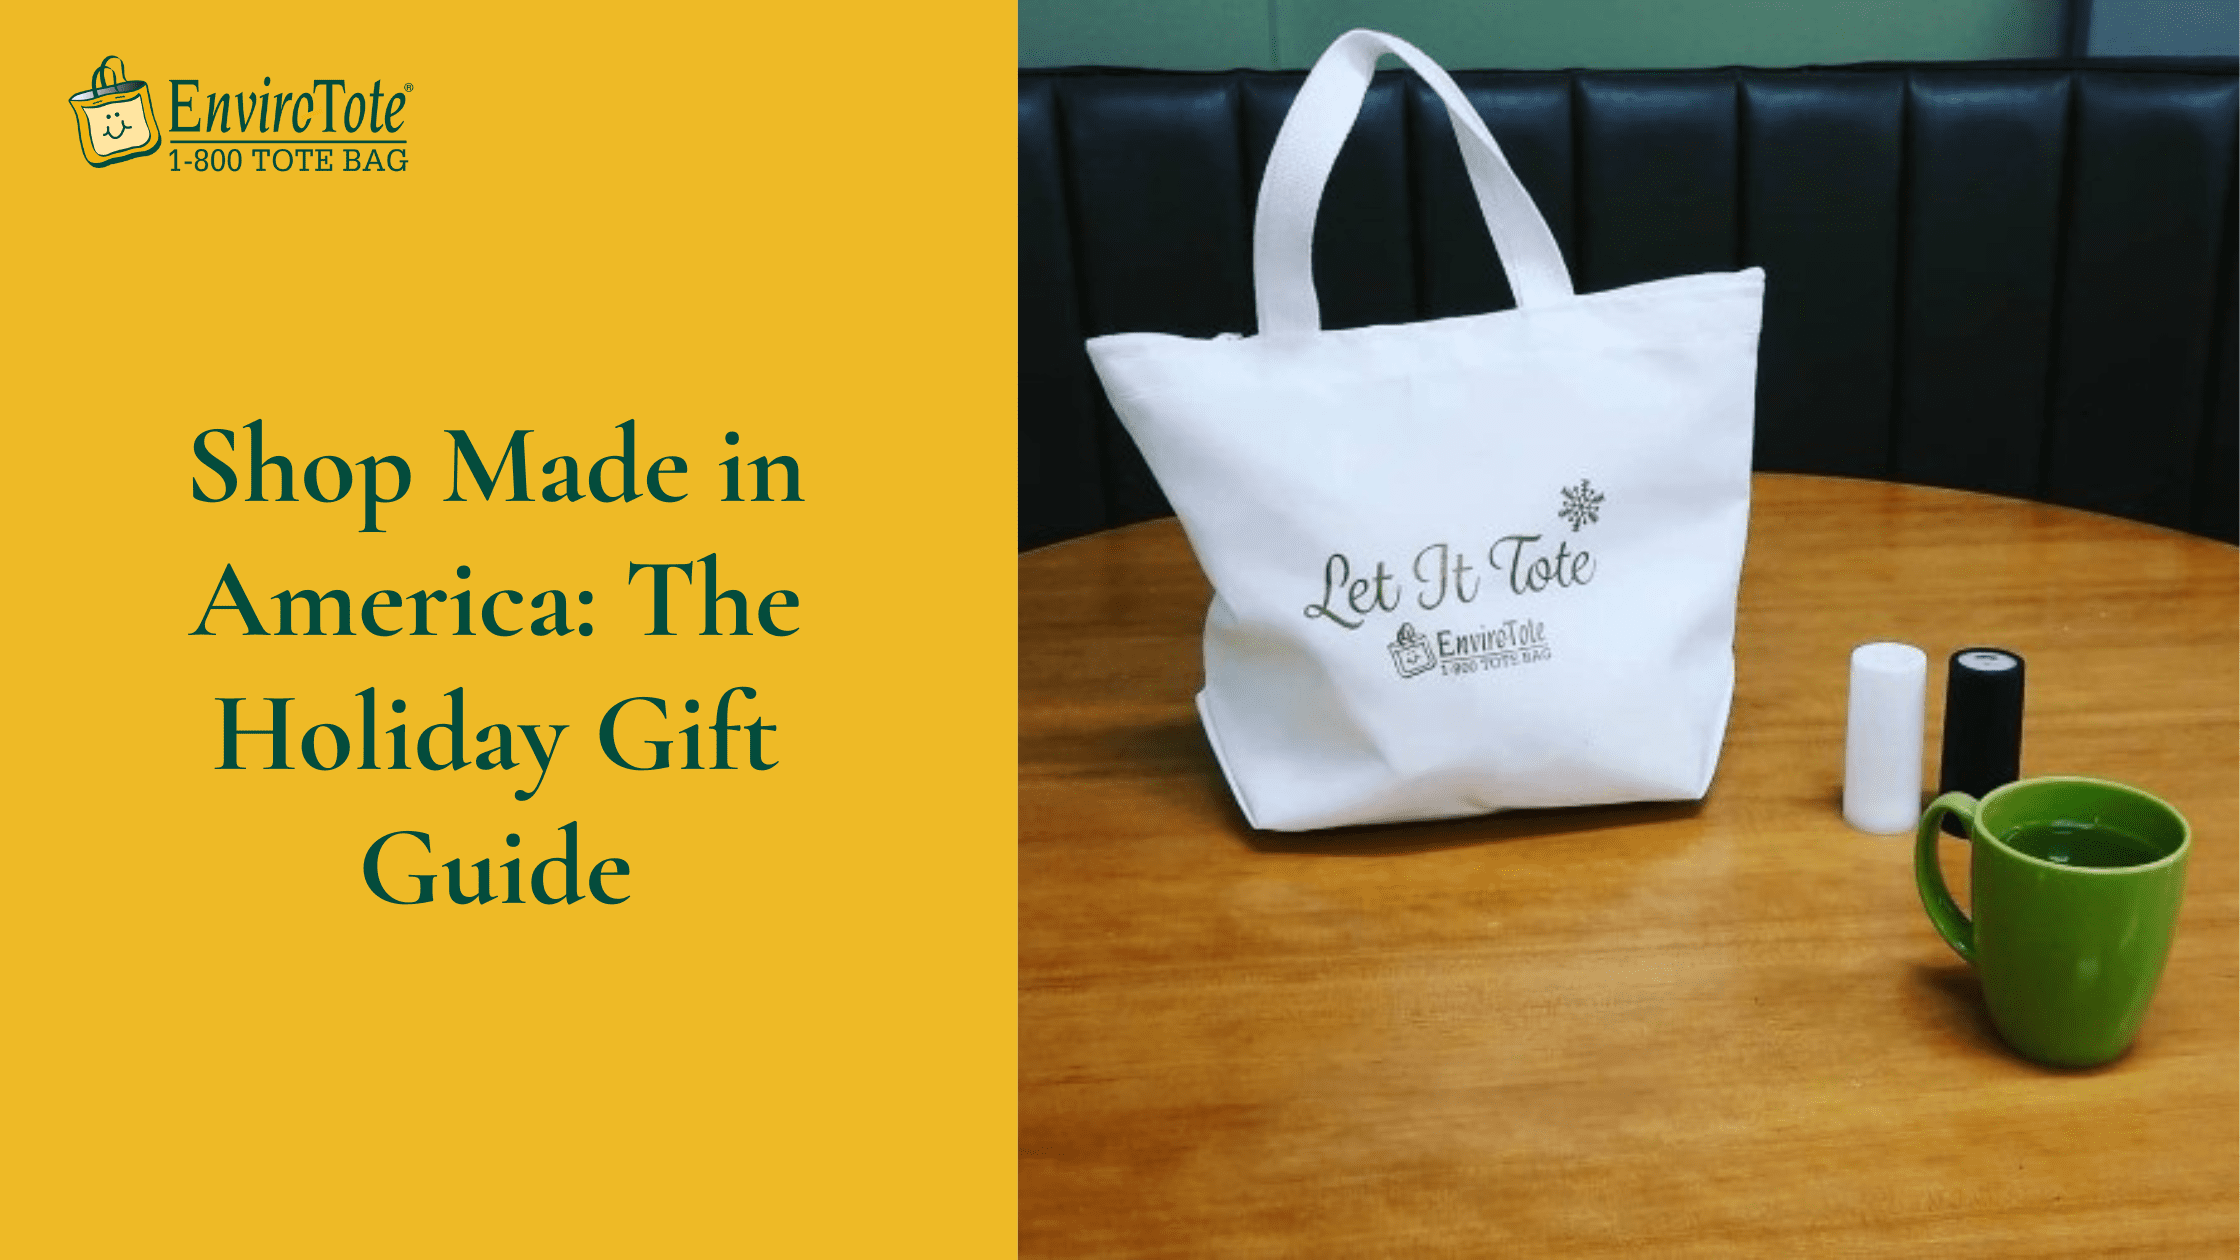 Shop Made in America is a movement that encourages Americans to buy American-made gifts this holiday season. Join us this year as we, and many others, shop Made in America products this holiday season for our family, friends, and colleagues!